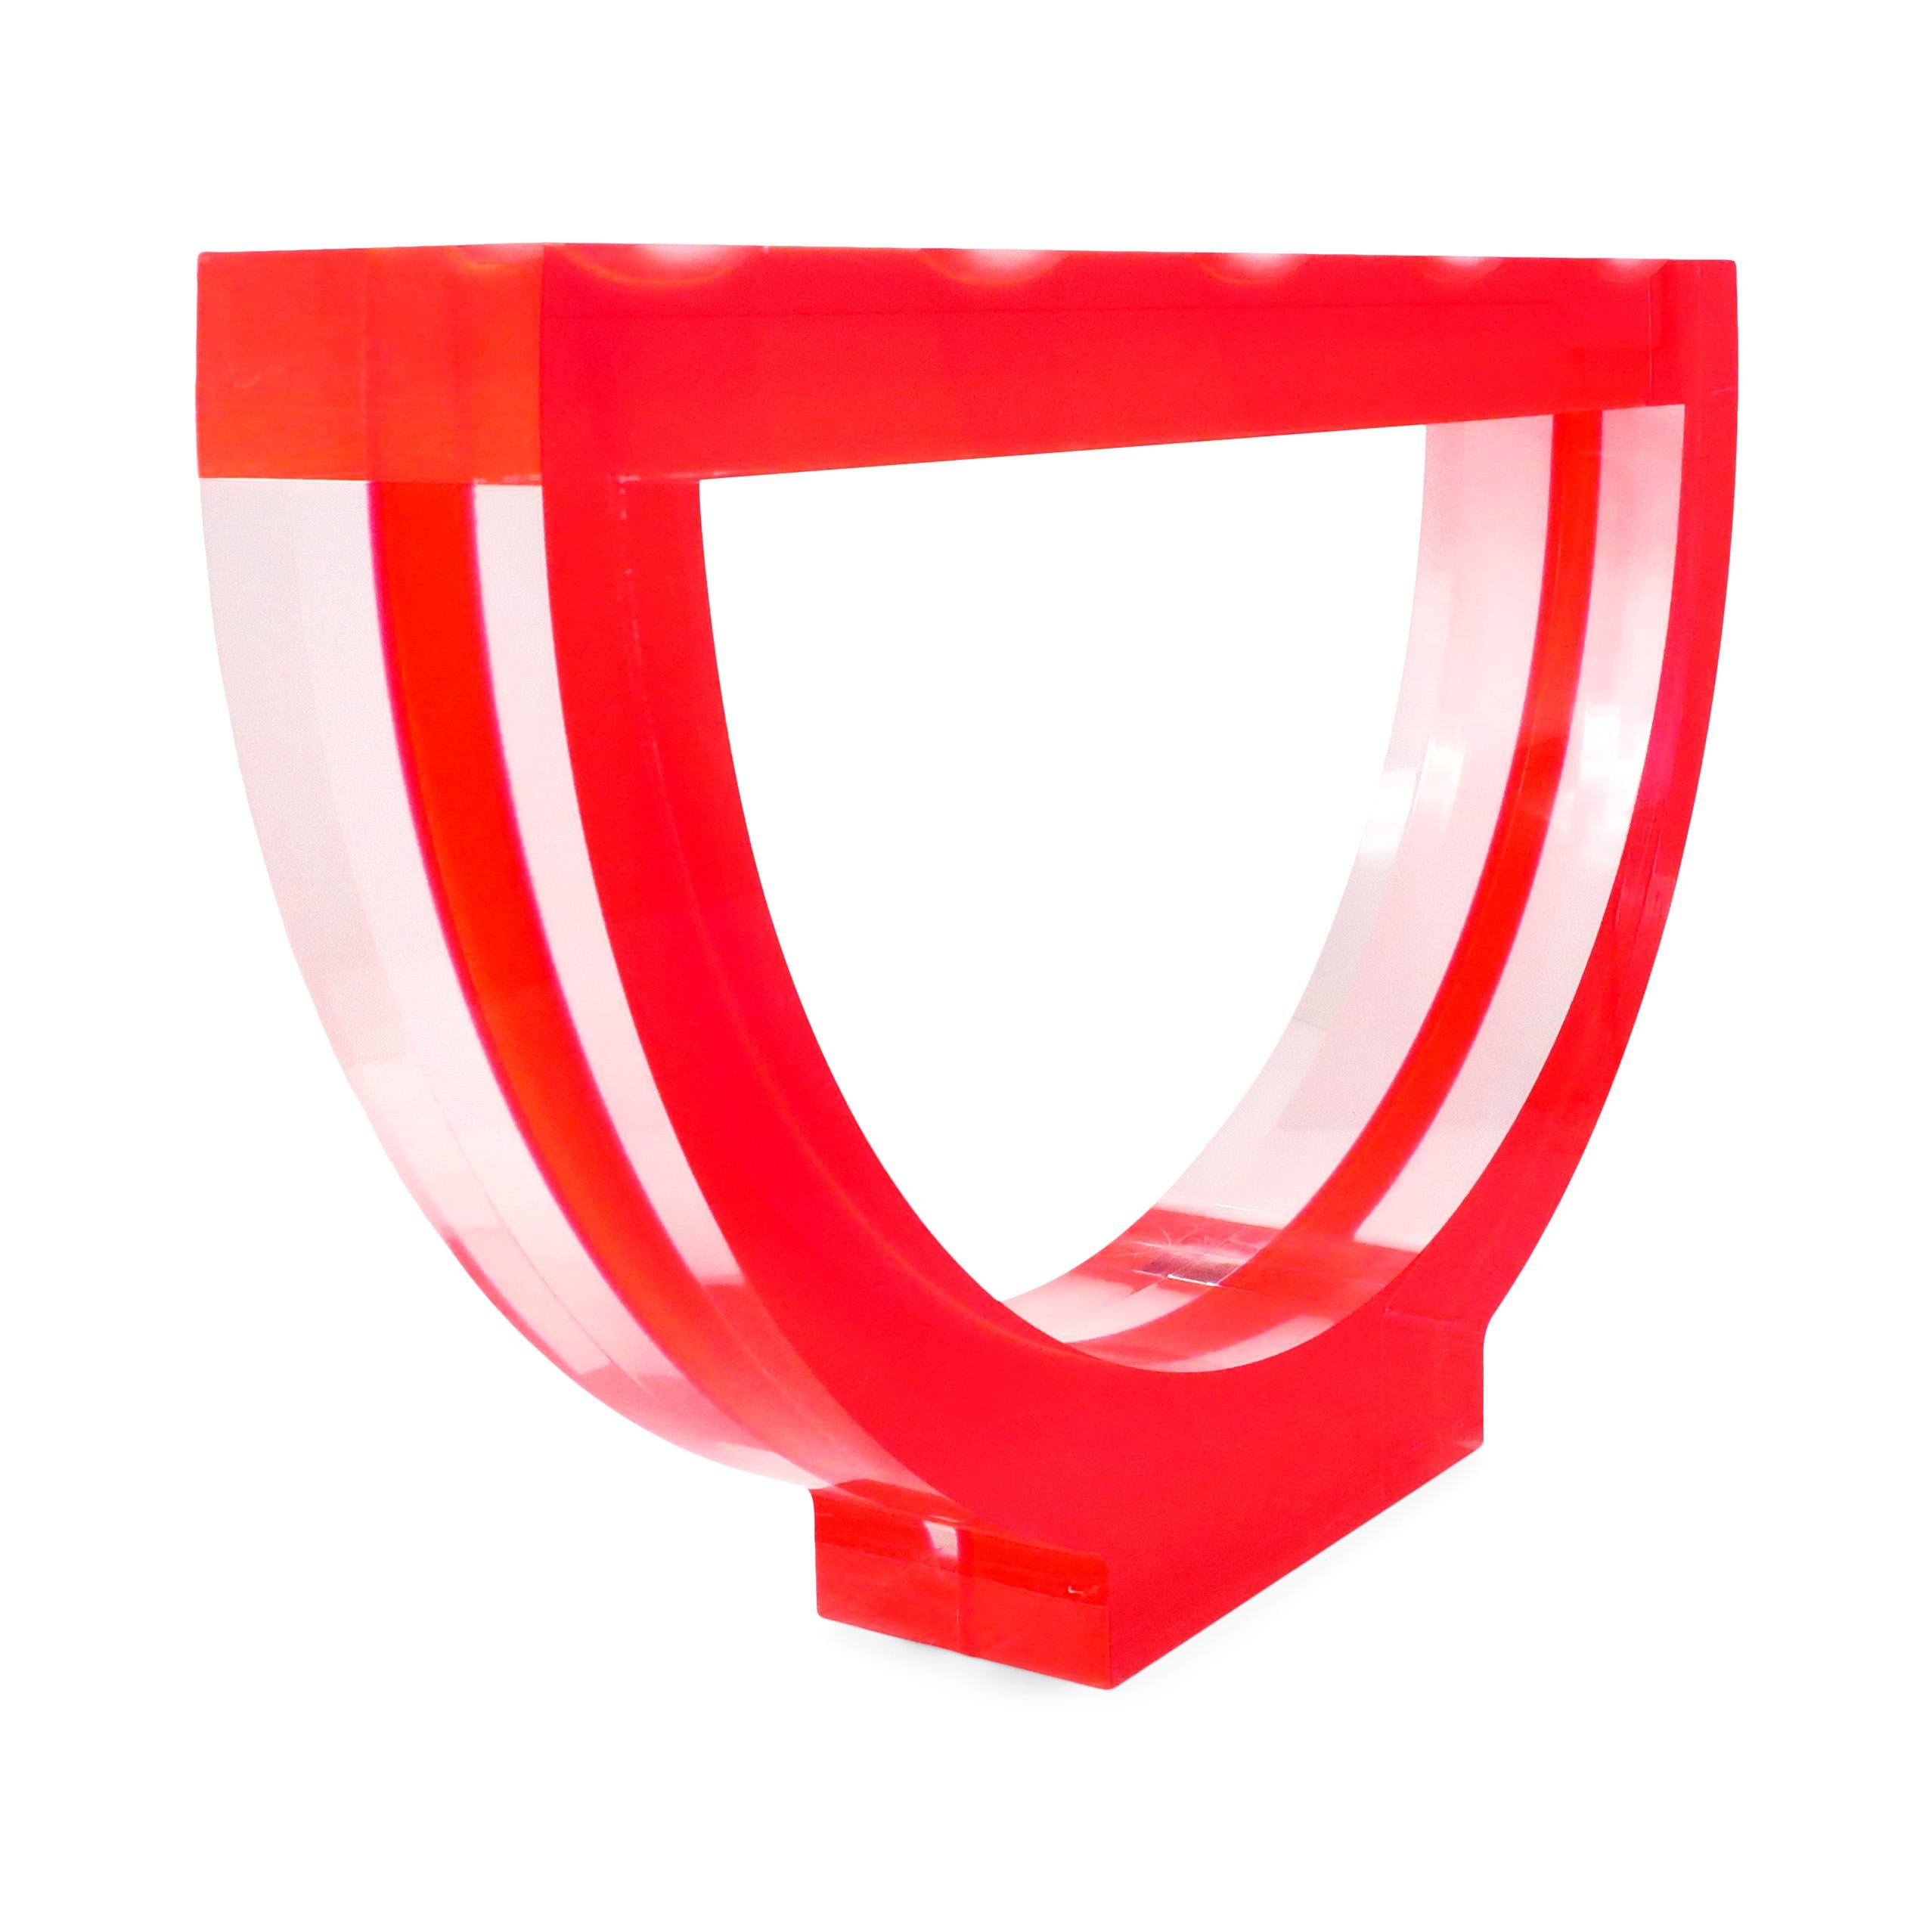 Post-Modern Laminated Acrylic Ospiti Collection Sculpture by A. Anastasio for Design Gallery For Sale